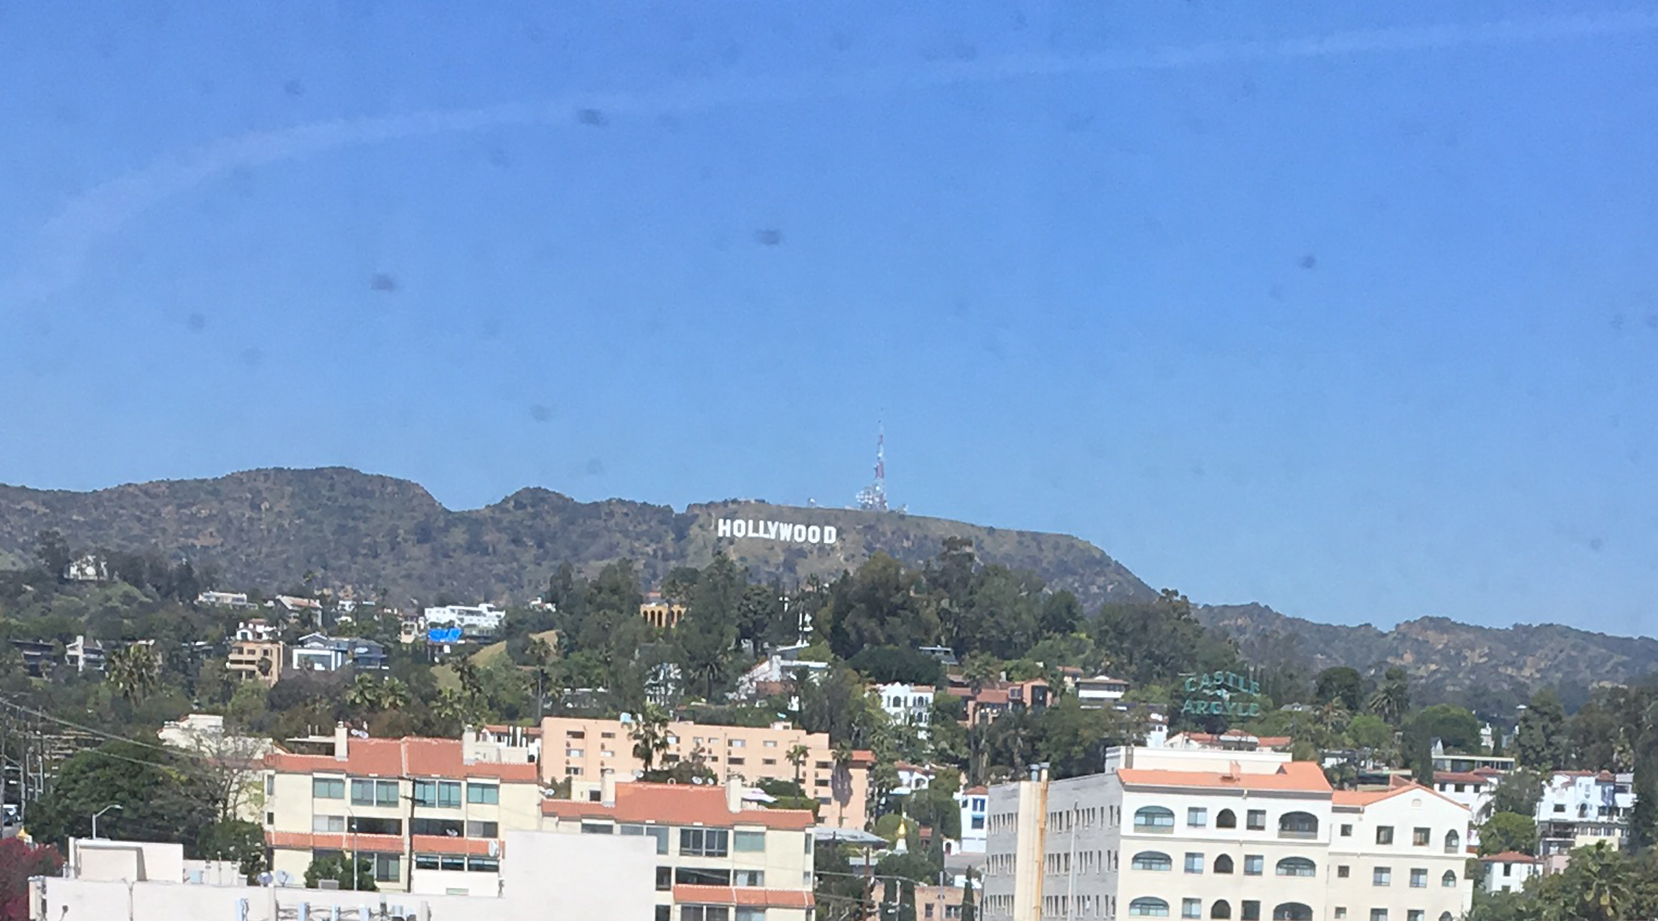 The view from our Board meeting at the Capitol Records building.